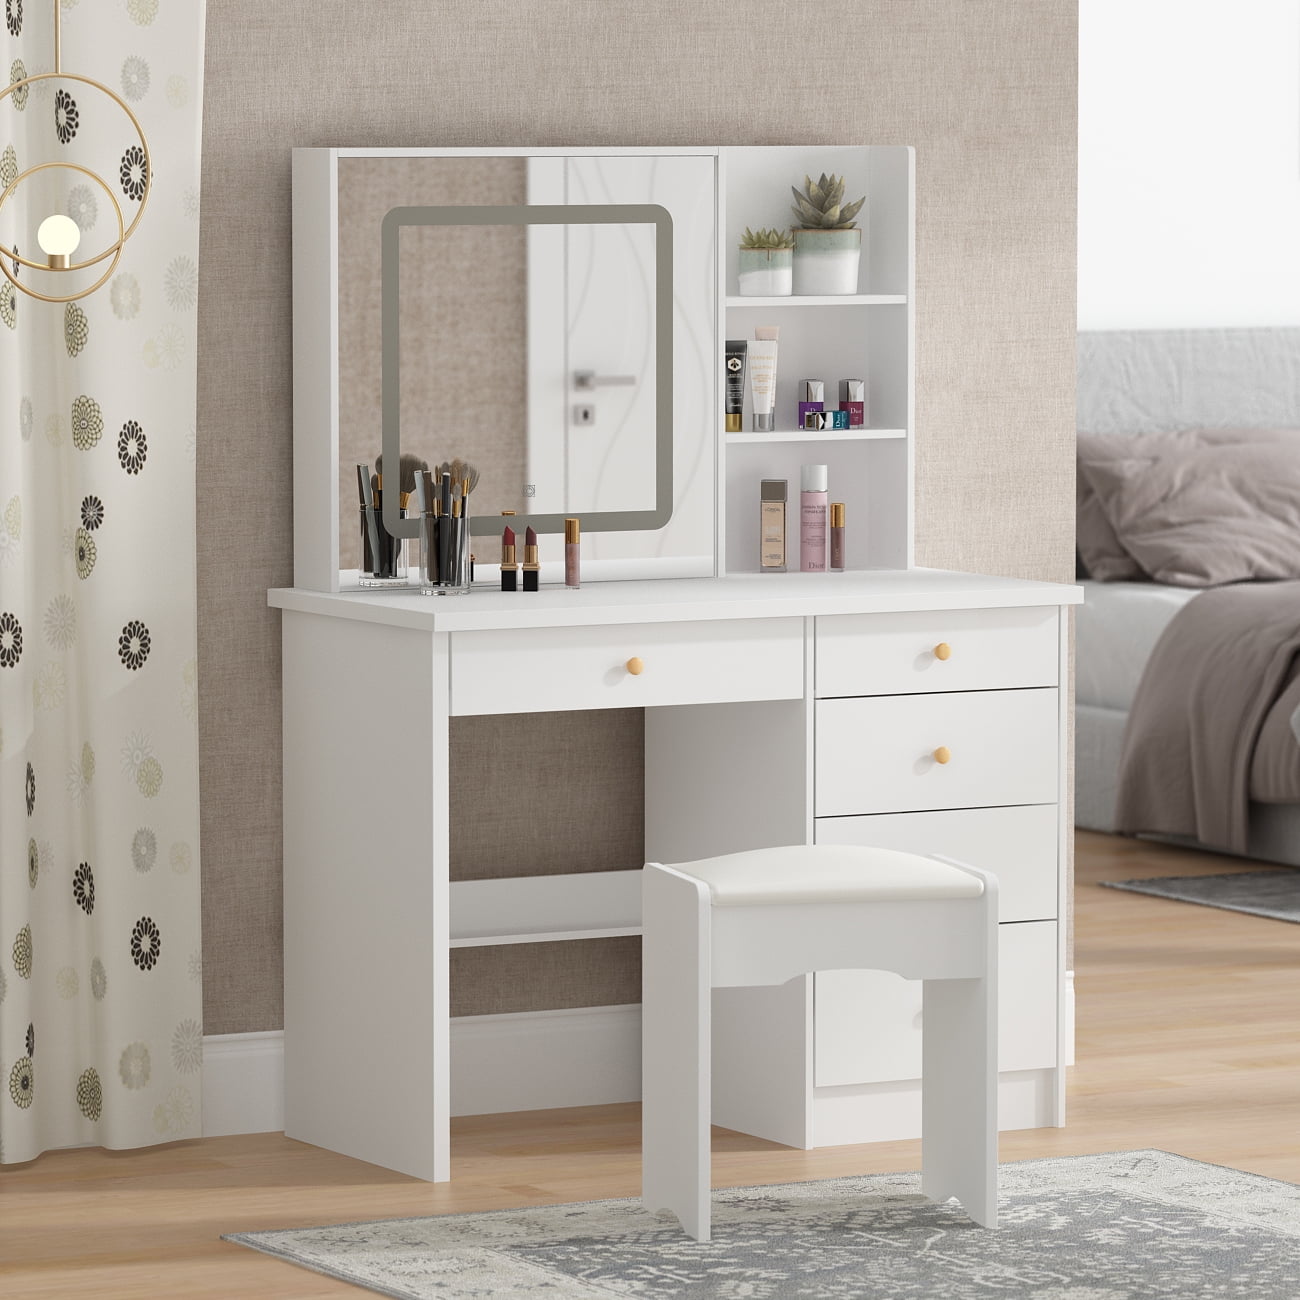 Details about   Dressing Table with Large Round Mirror and 8 Light Bulbs for Bedroom 